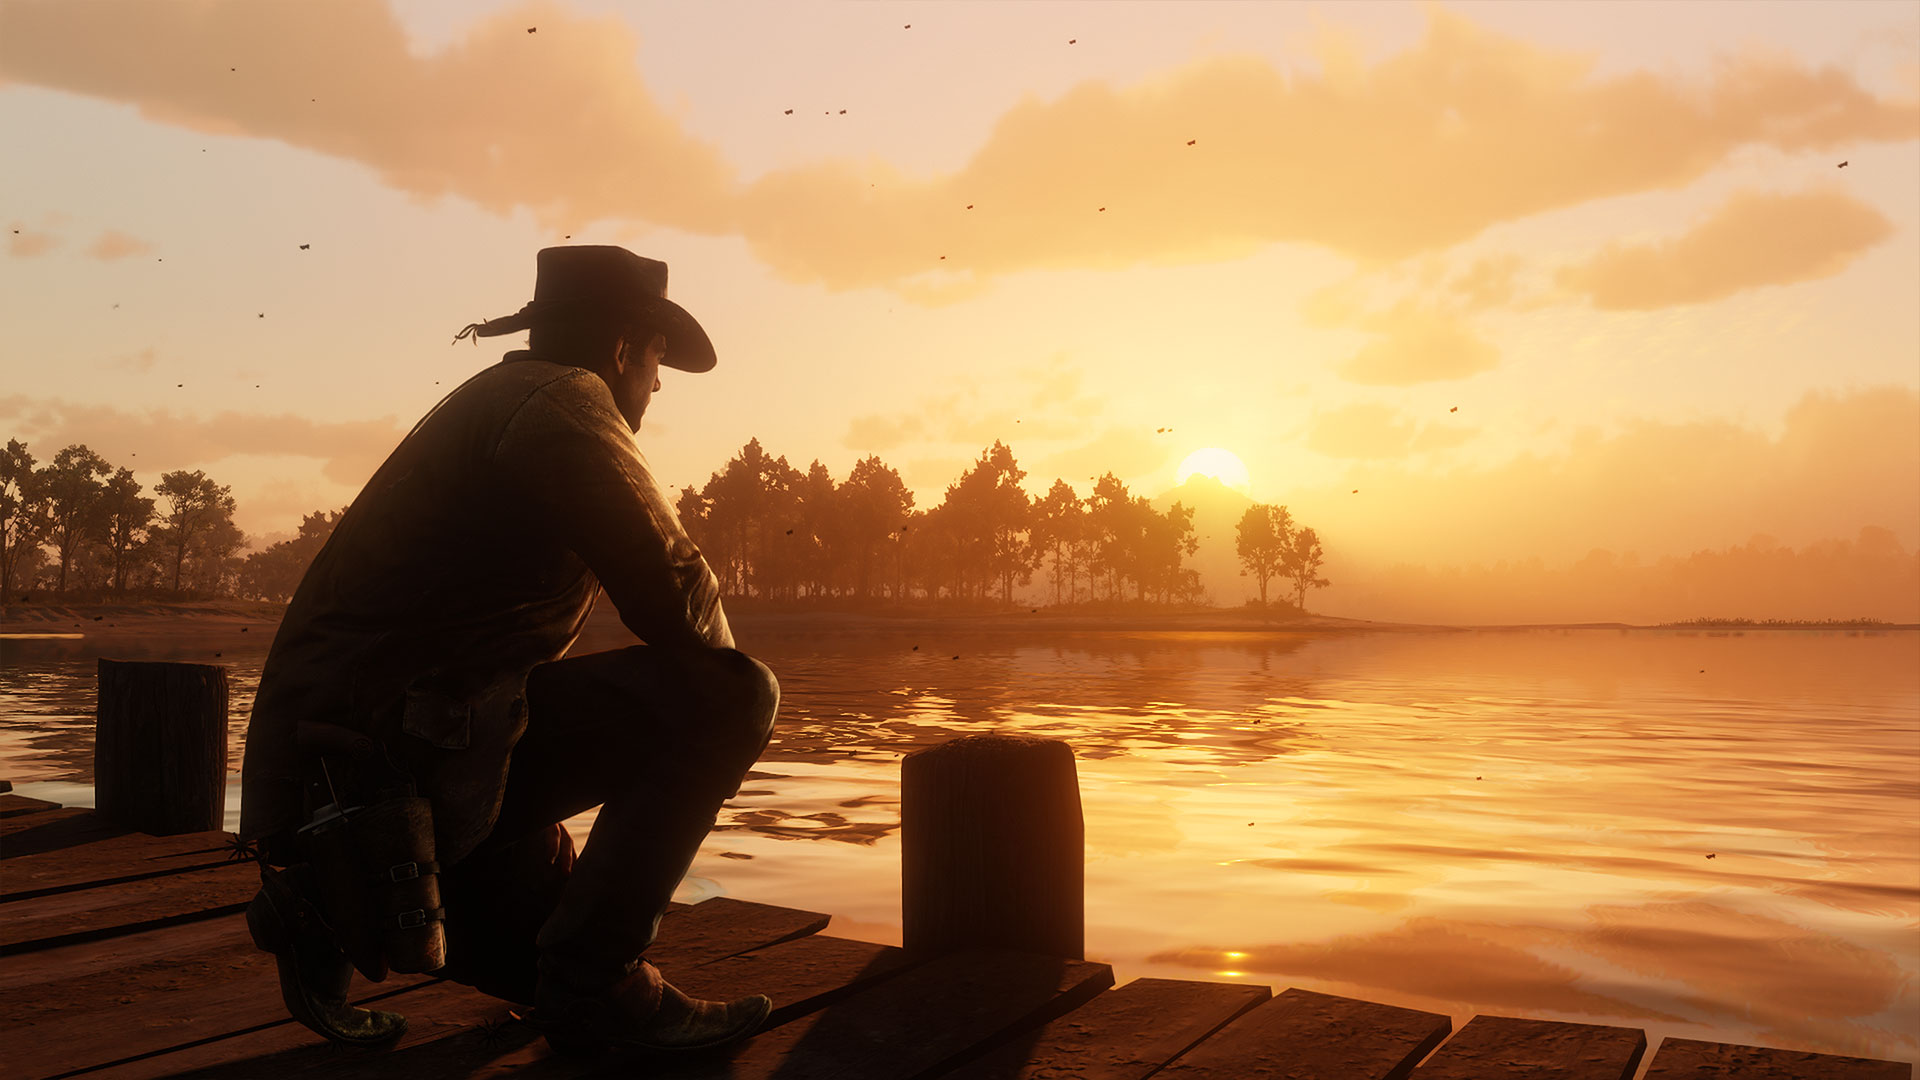 See the full Red Dead Redemption 2 map here